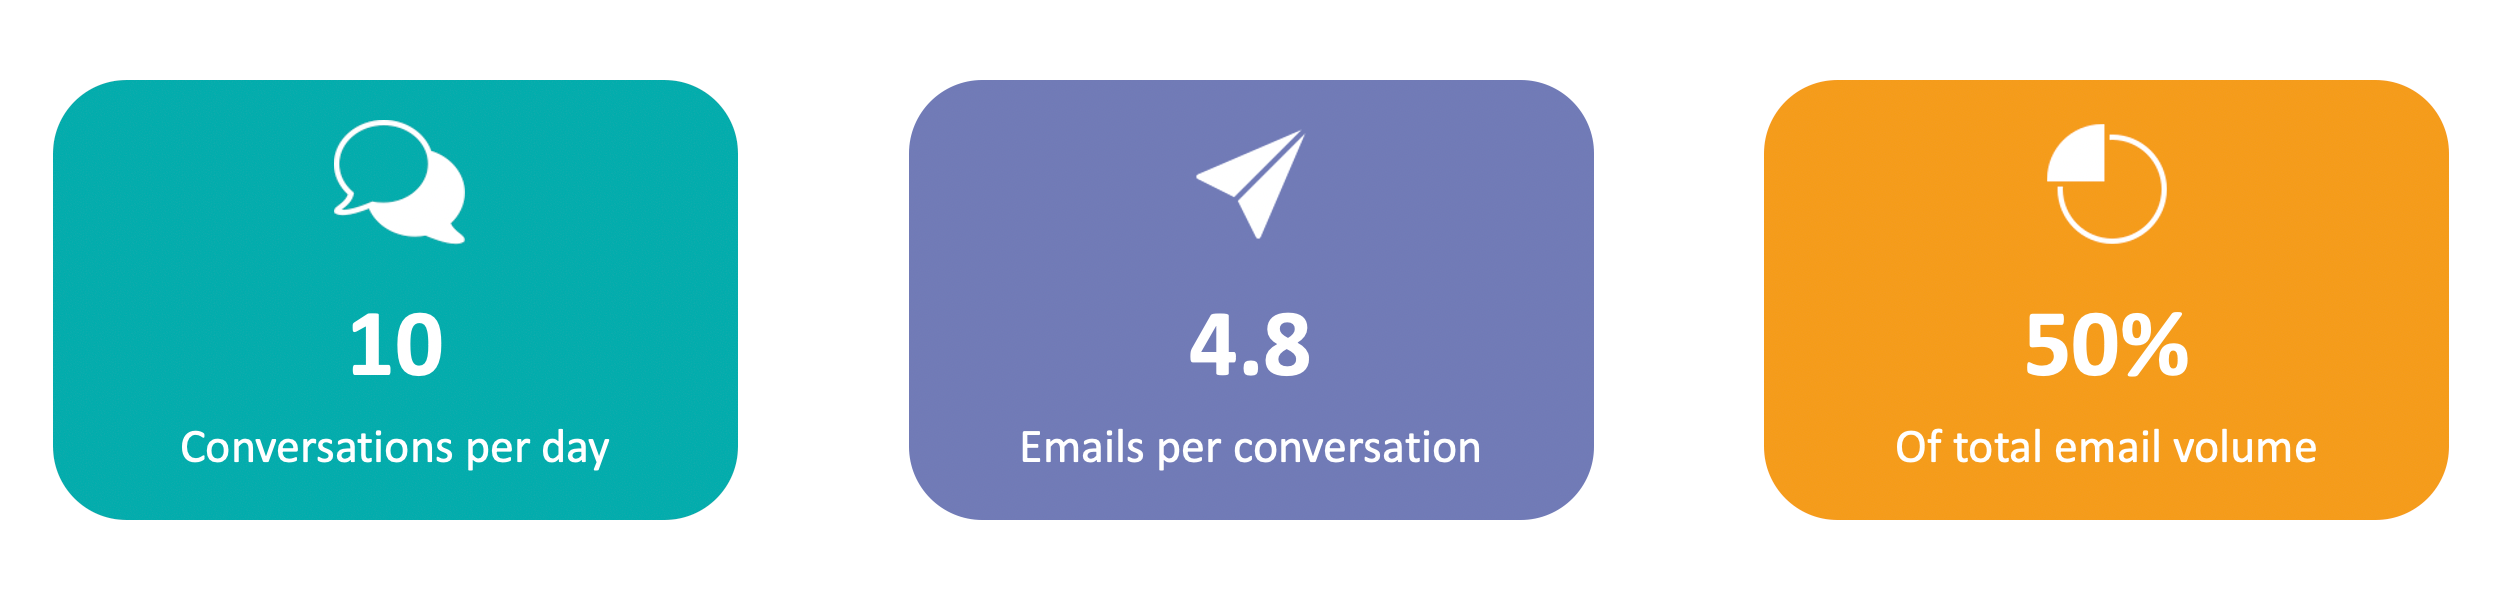 Email conversations infographic